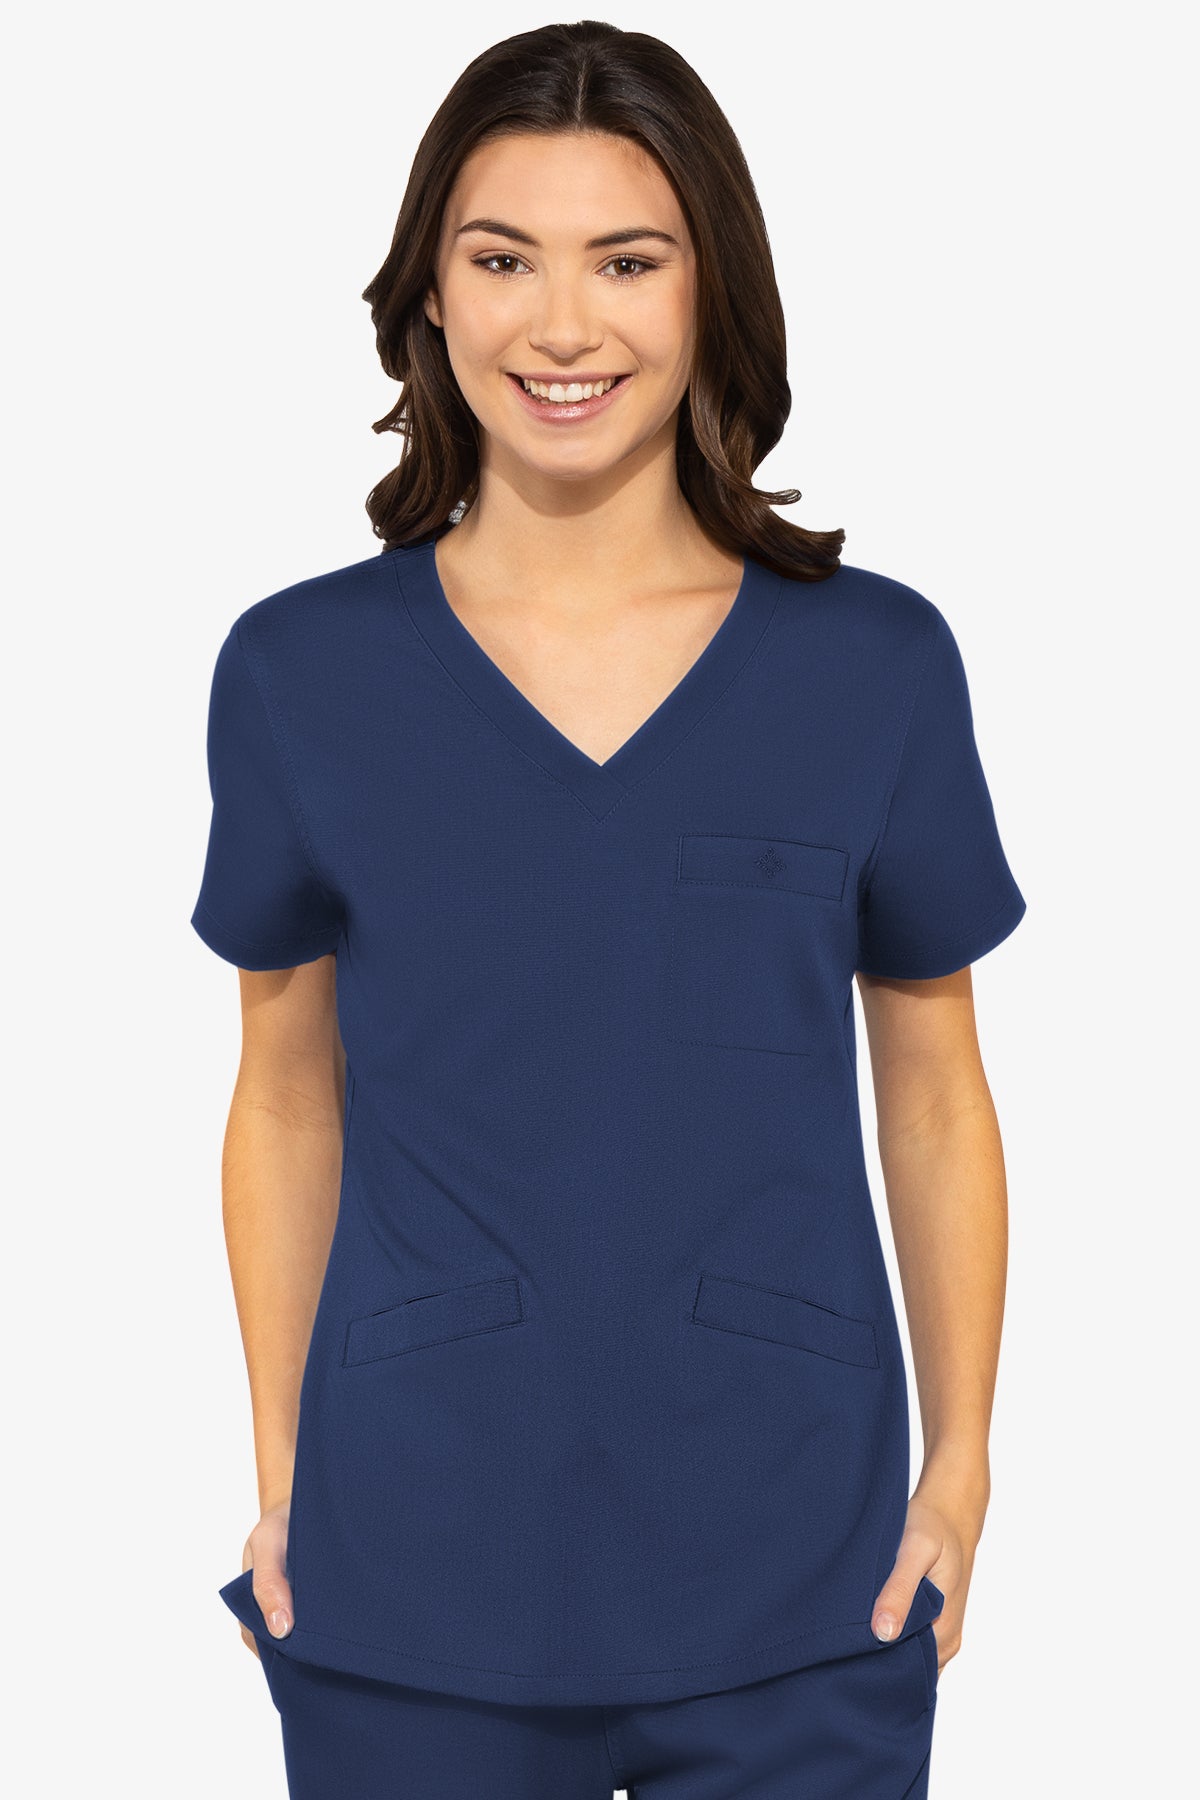 Med Couture Scrub Top Touch Classic V-Neck in Navy at Parker's Clothing and Shoes.